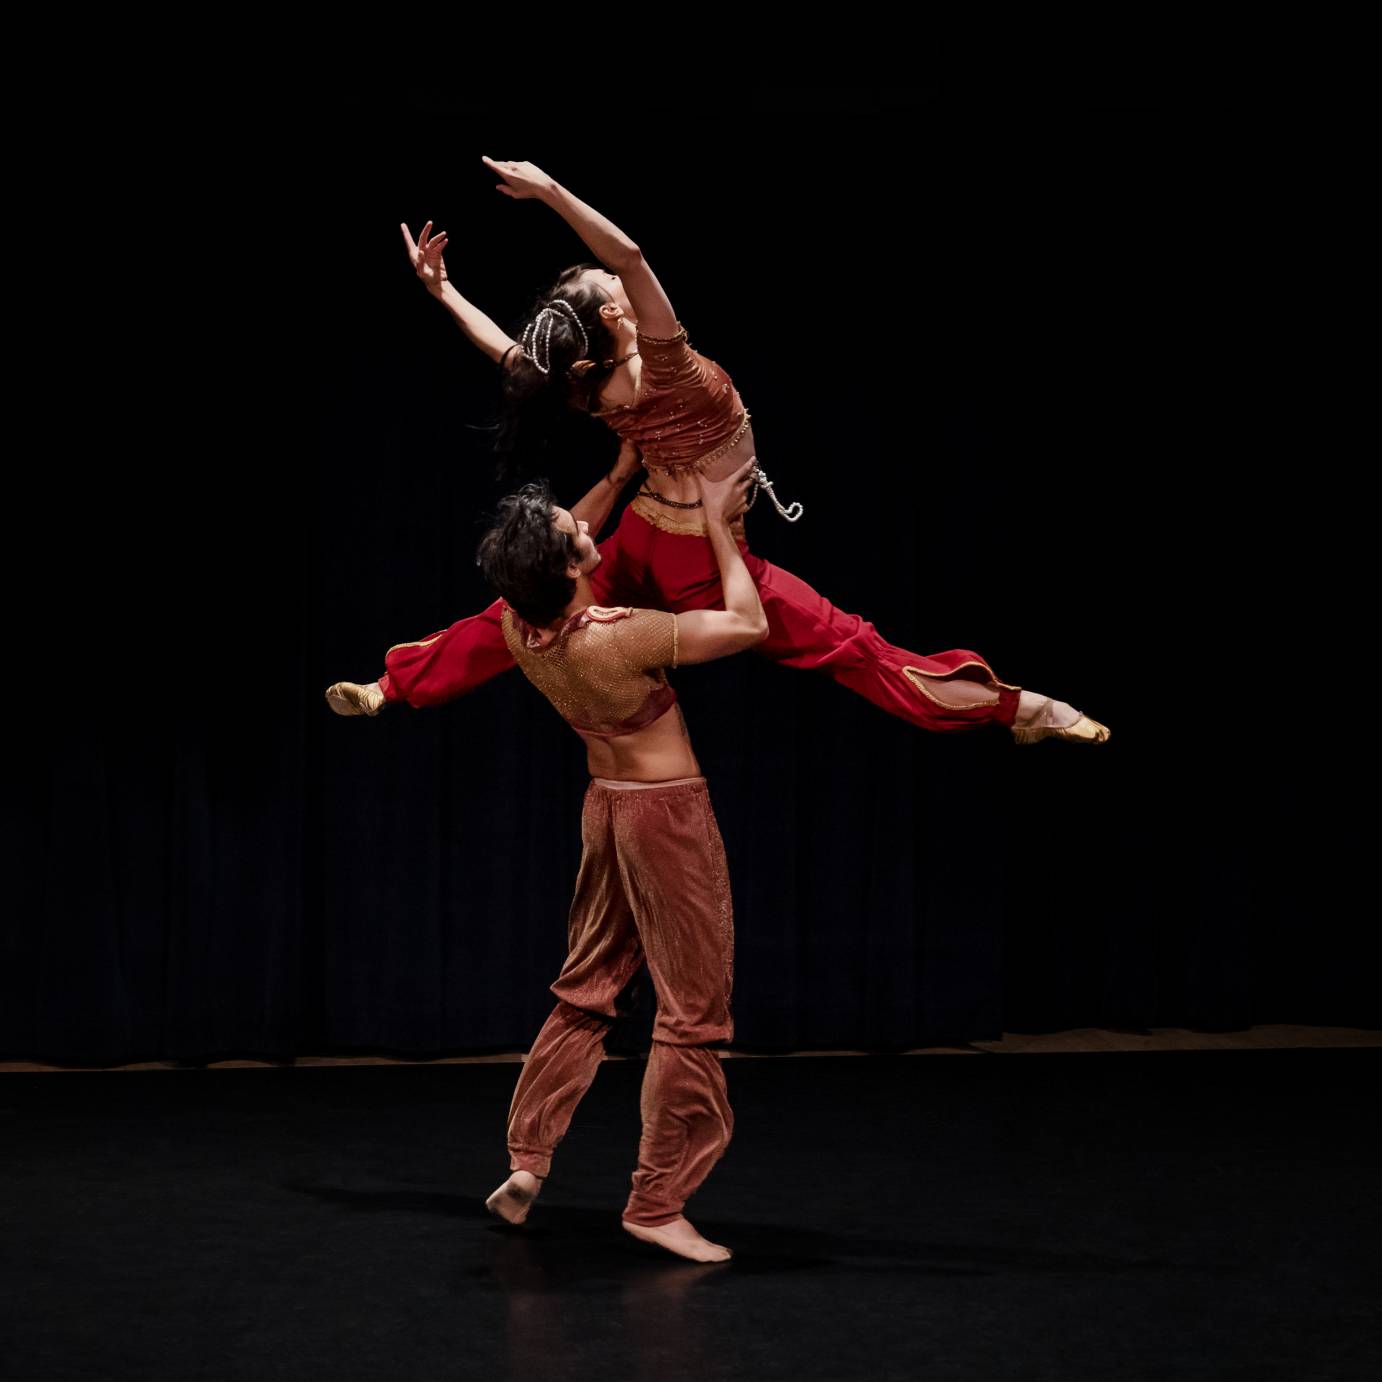 A man lifts a woman into the air, her legs split, her arms lifted